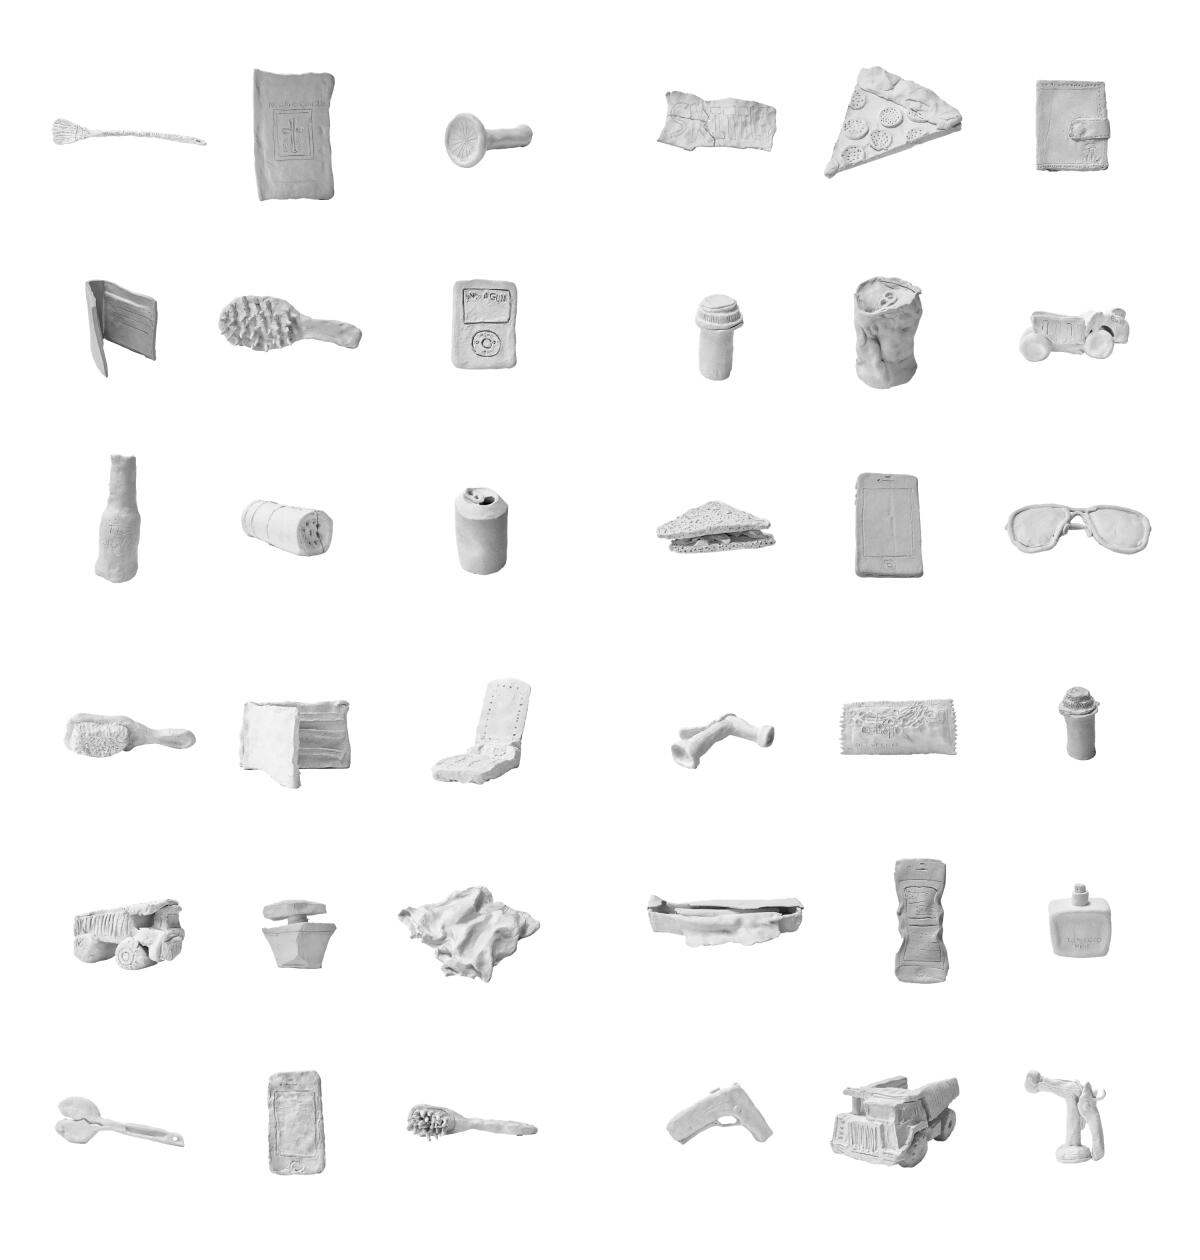 A photograph shows a tidy grid of clay objects that include a slice of pizza, sunglasses, a hairbrush and an iPod